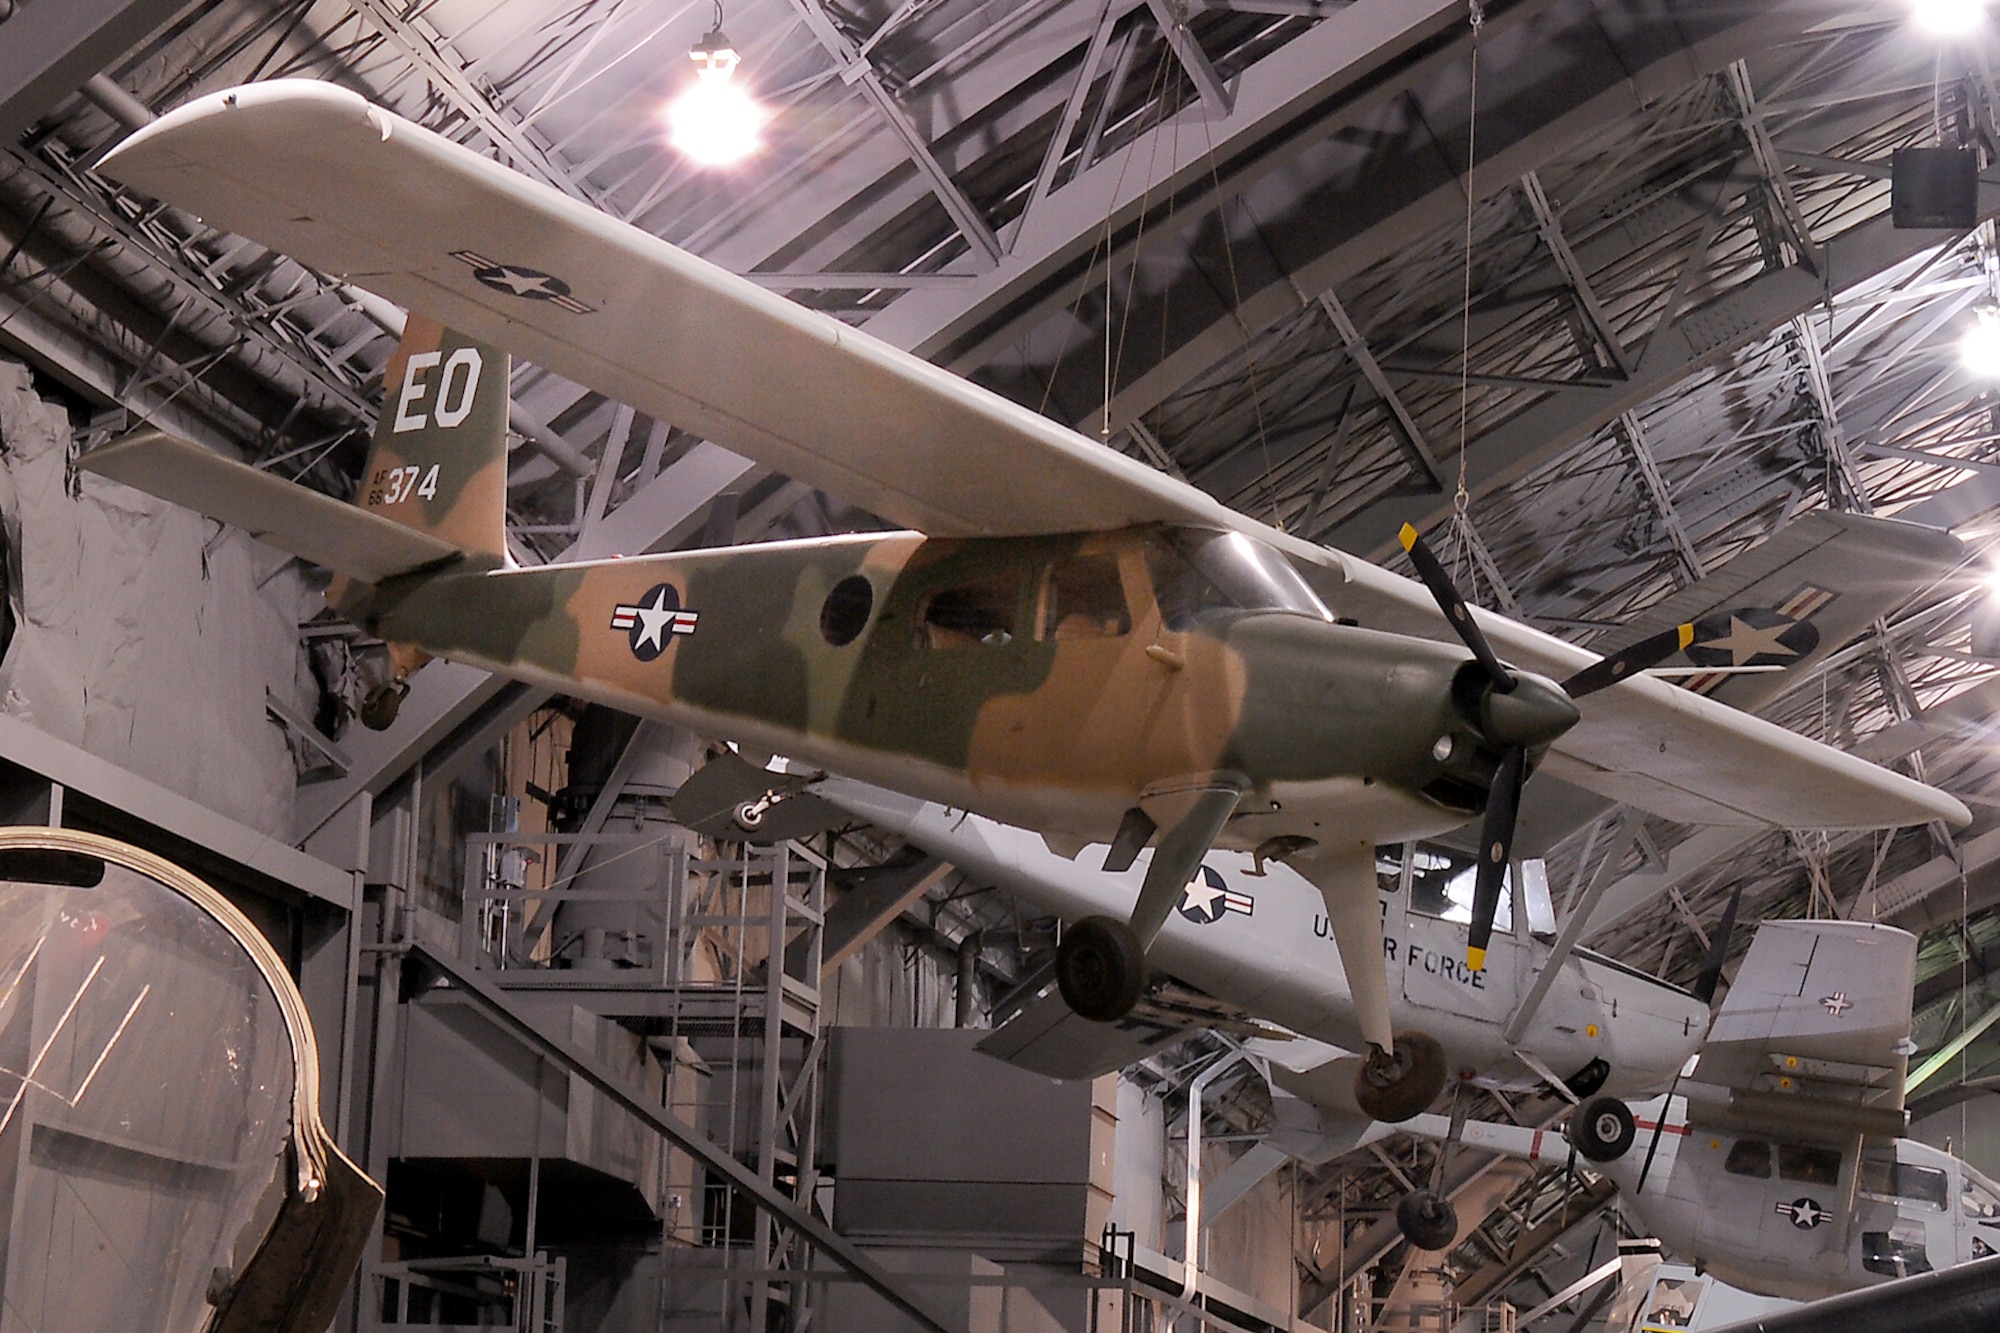 DAYTON, Ohio -- Helio U-10D Super Courier in the World War II Gallery at the National Museum of the United States Air Force. (U.S. Air Force photo)
